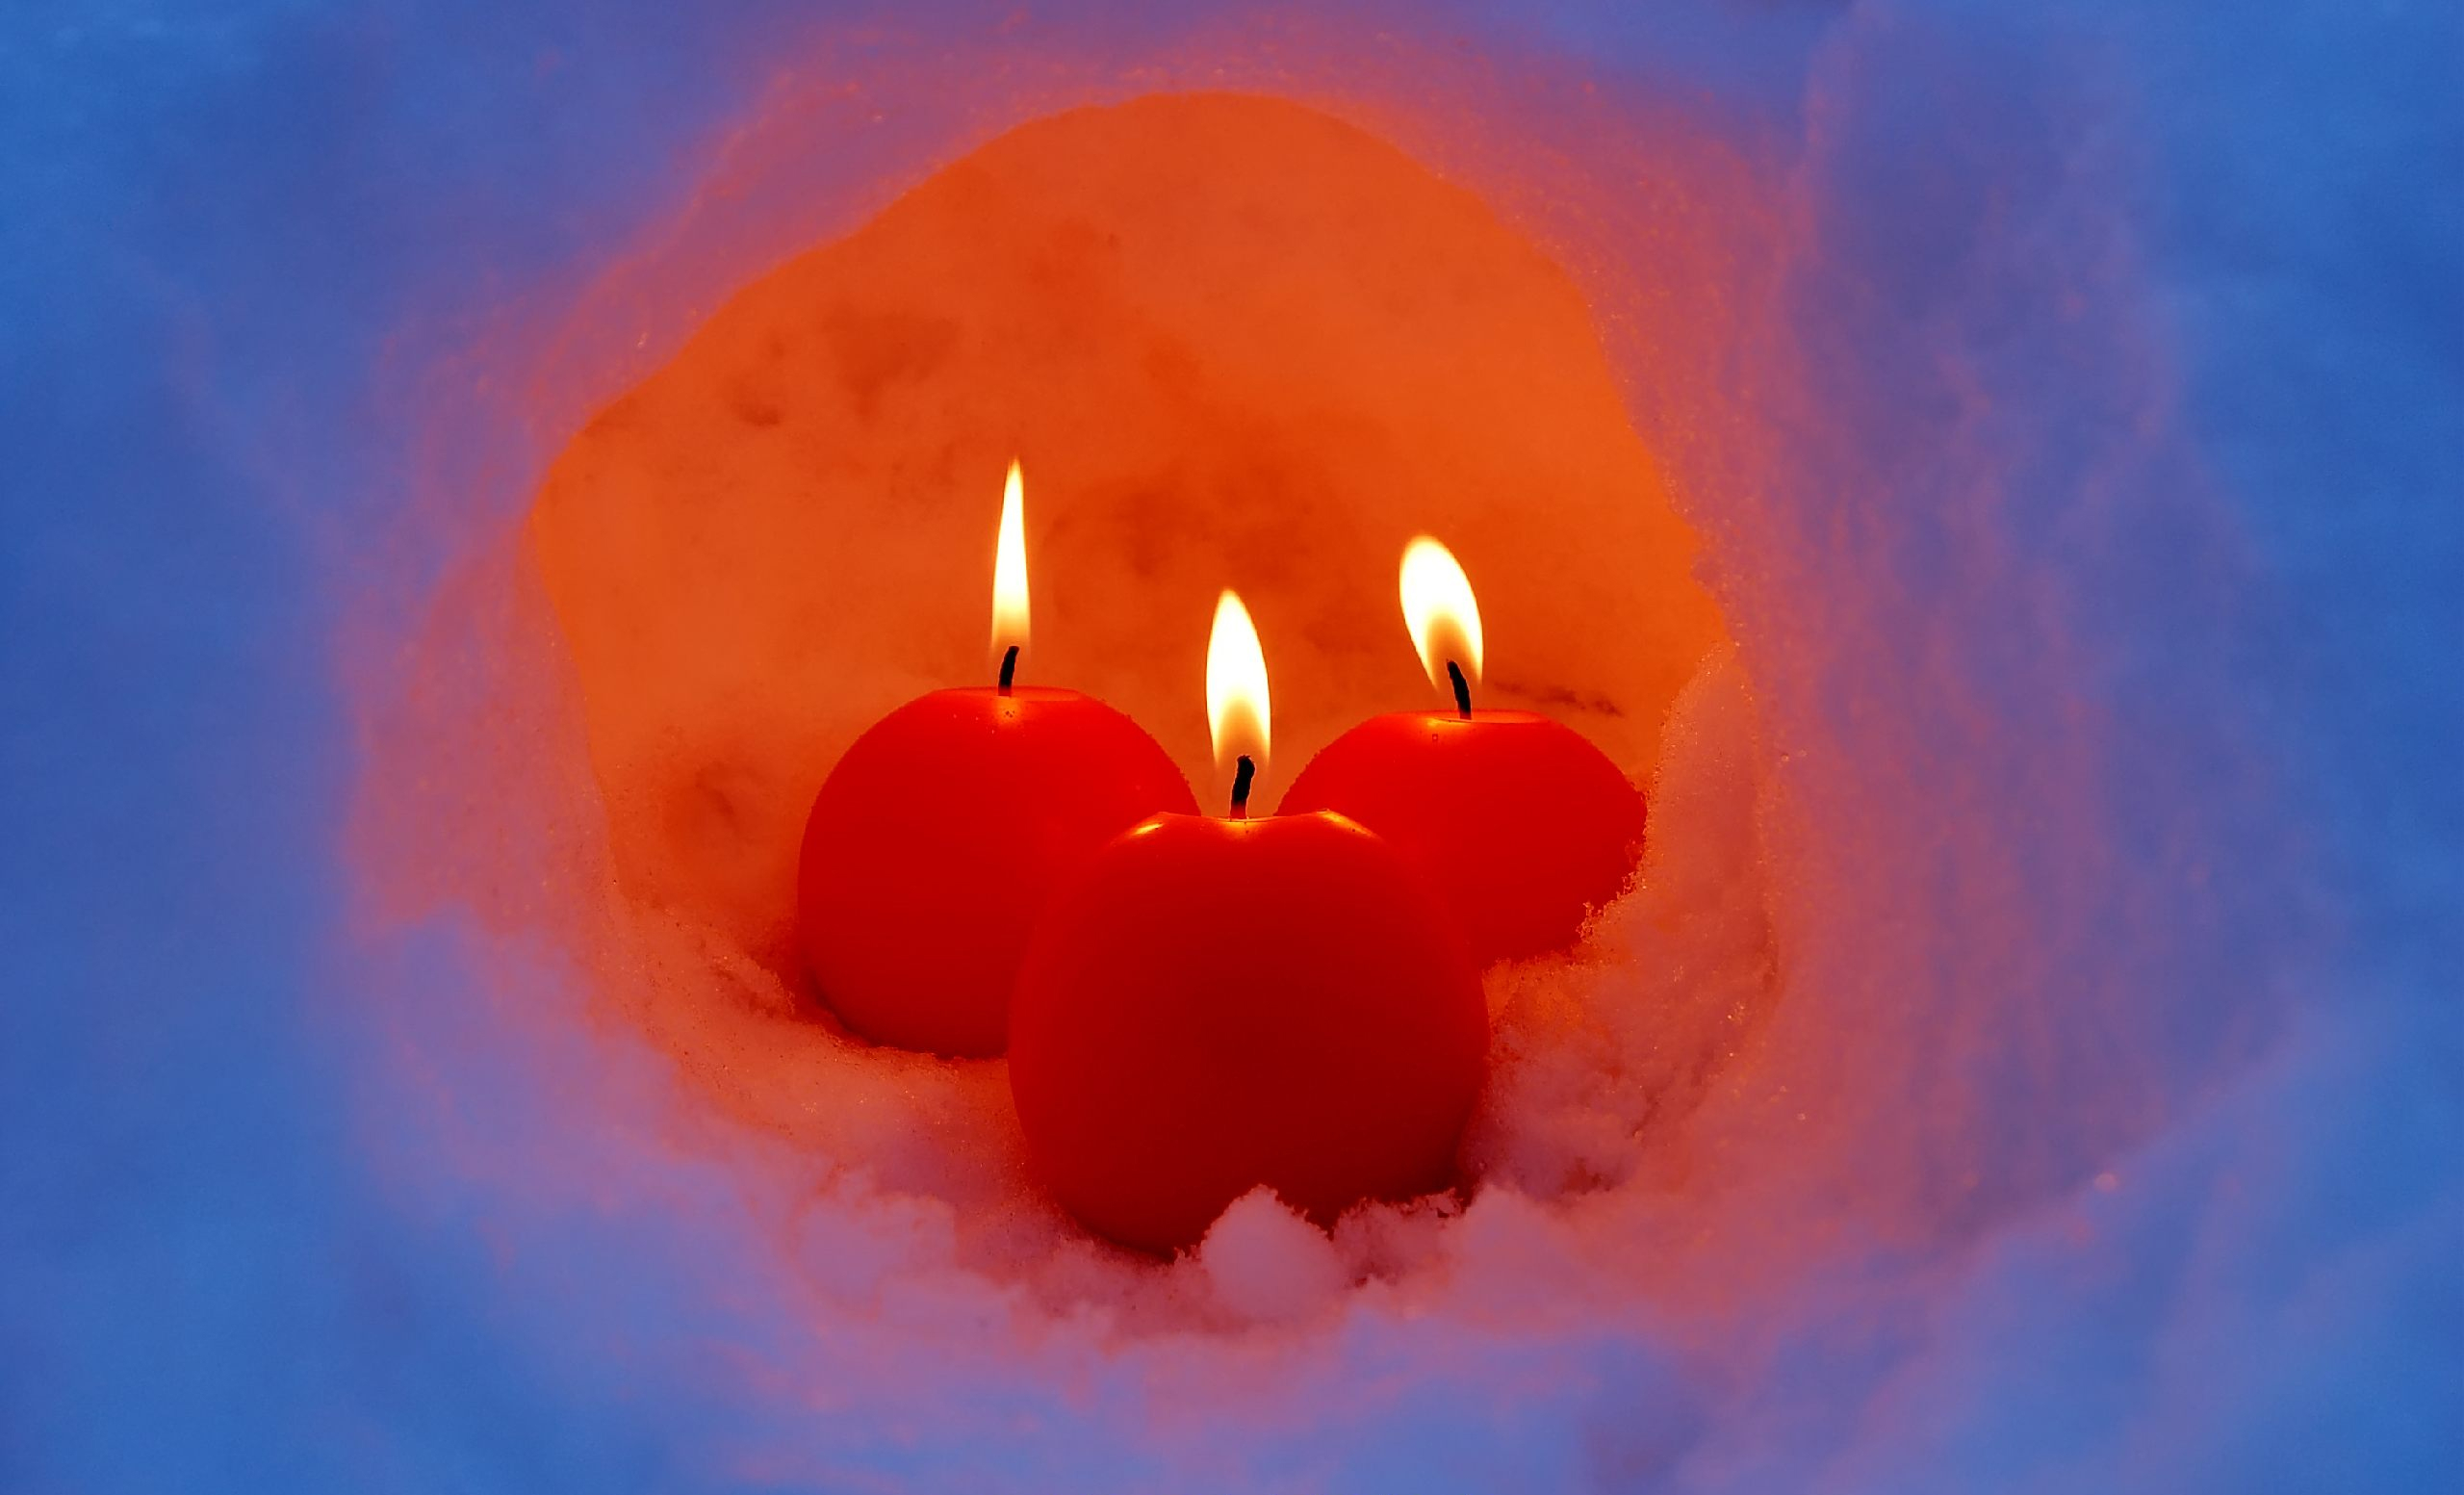 Winter-themed candle with snow in the background. Perfect for desktop wallpaper.